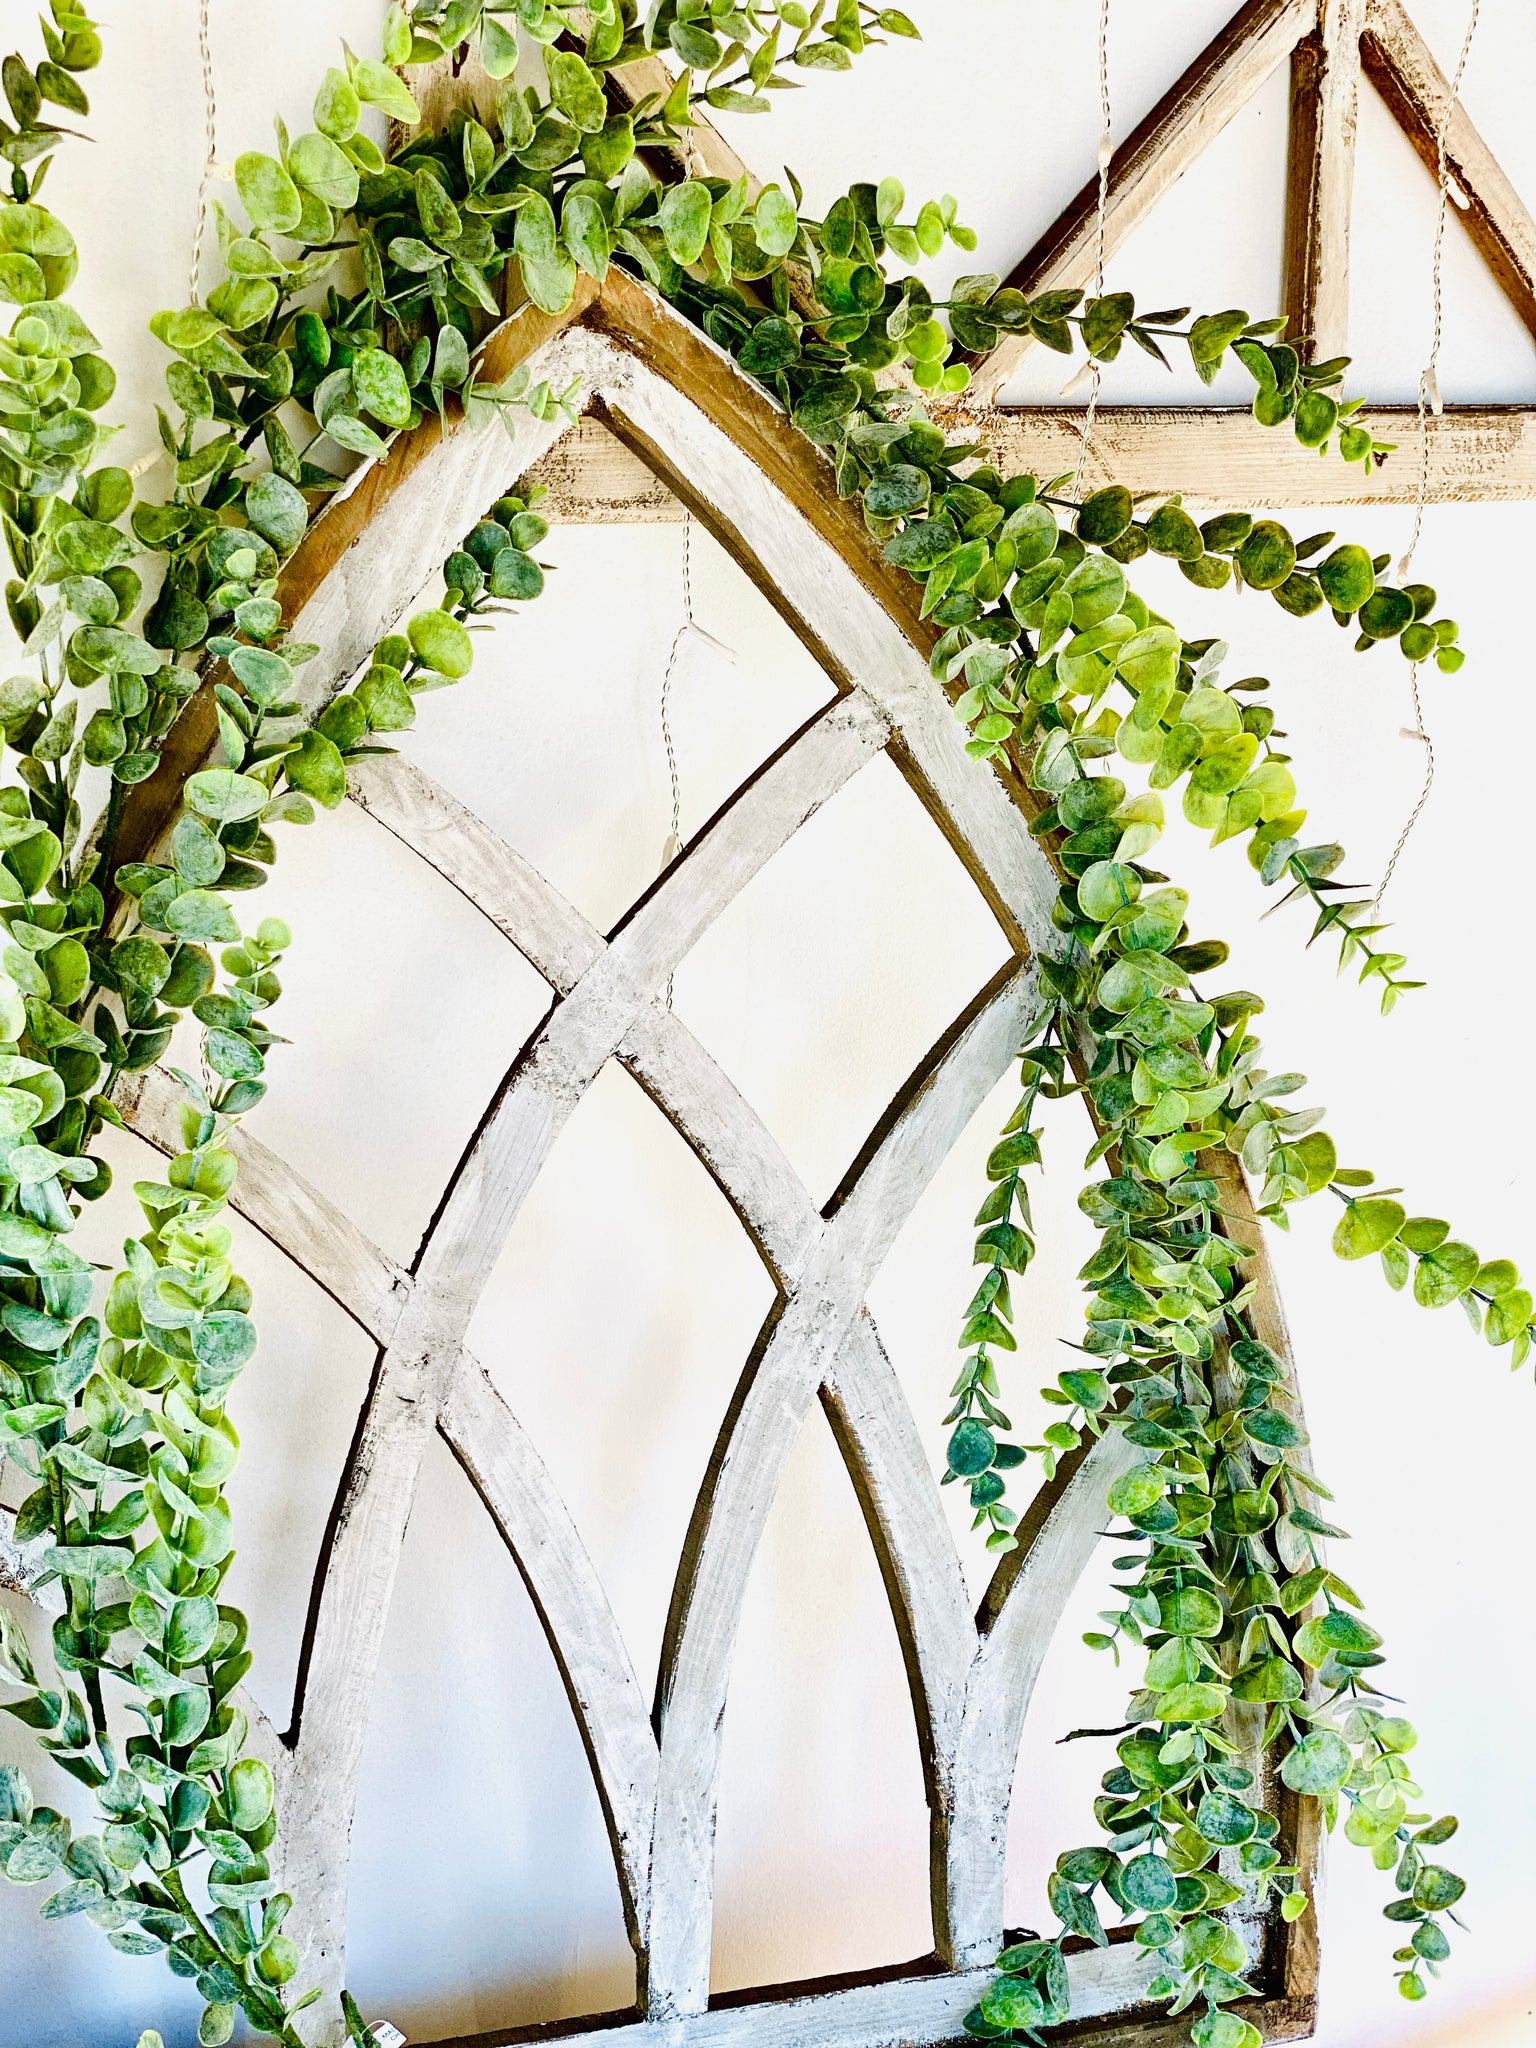 6' FROSTED EUCALYPTUS GARLAND